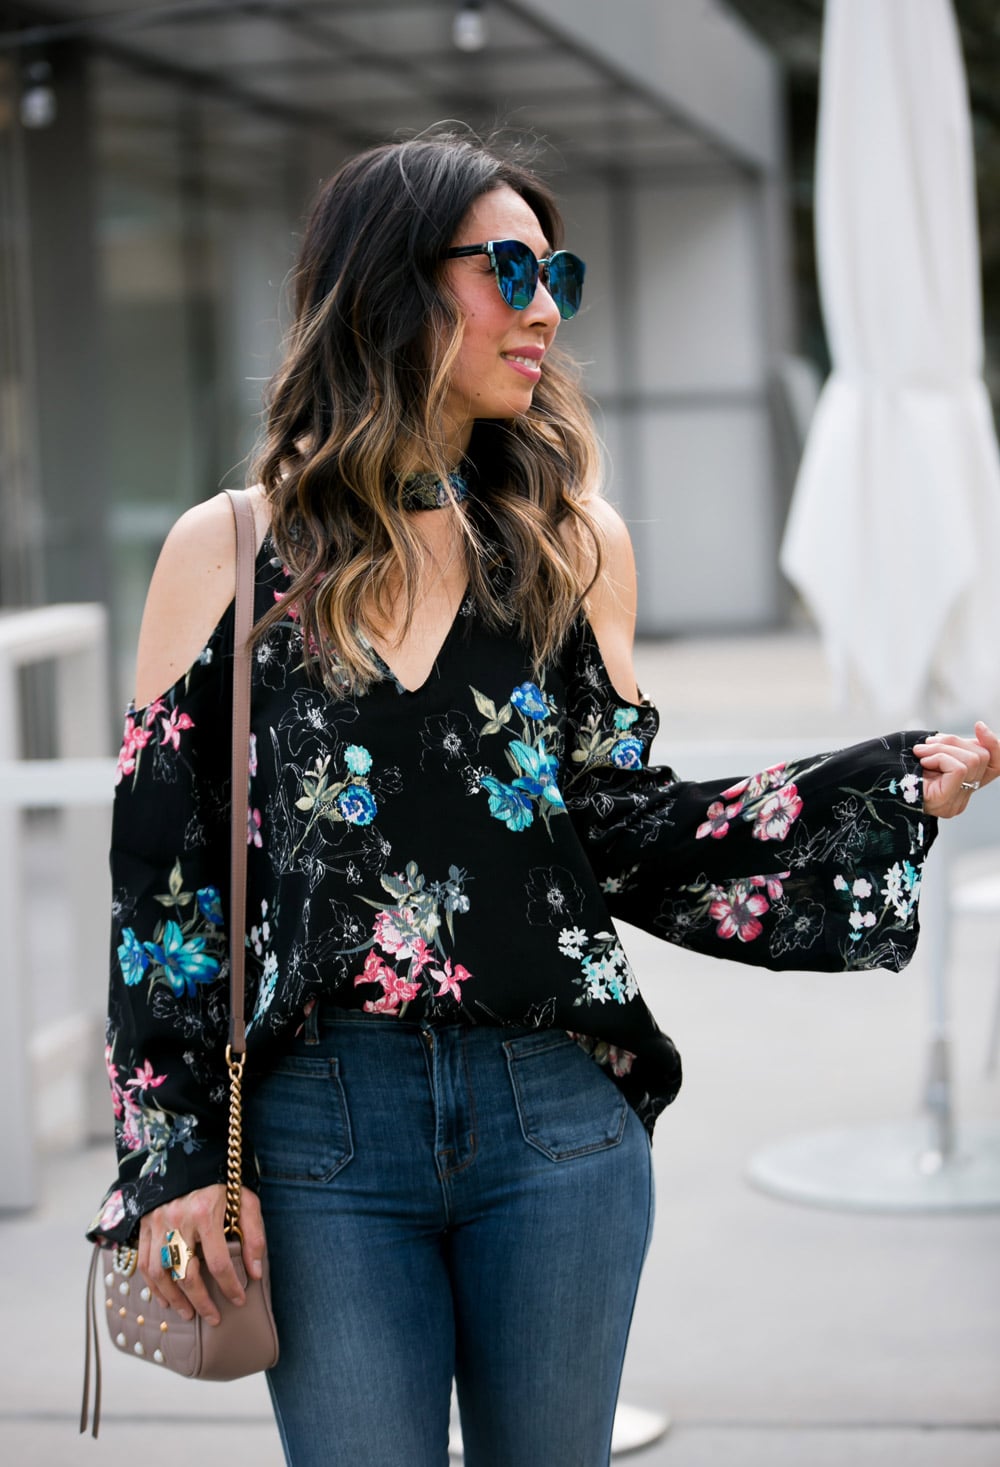 cold shoulder bell sleeve dark floral top wishing well acacia turquoise ring gucci pearl marmont bag